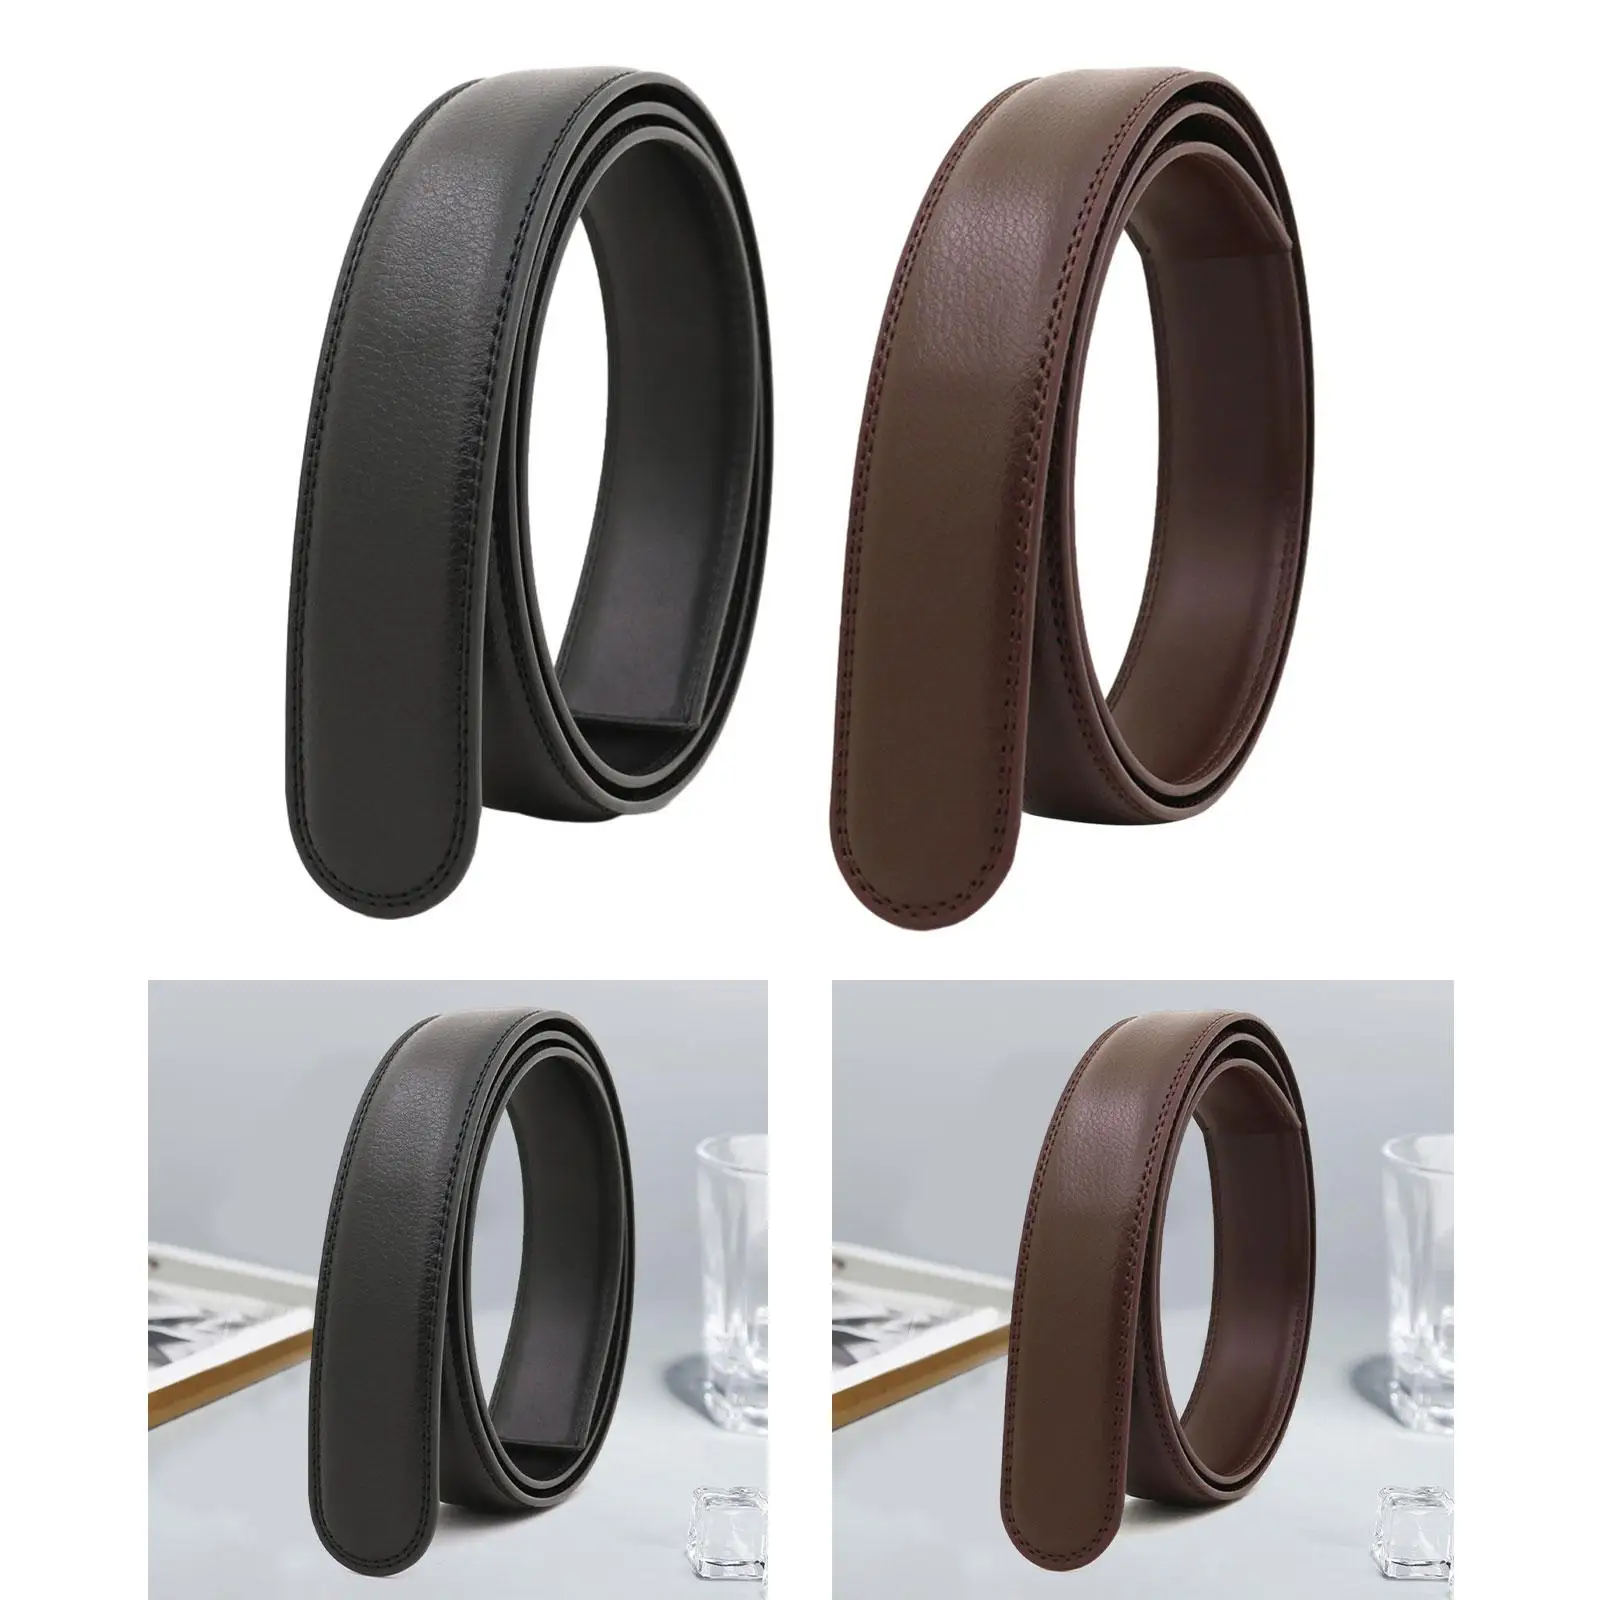 Belt Strap Replacement Stylish Formal Waistband Costume Accessories Waist Belt for Daily Wear Events Business Shopping Pants